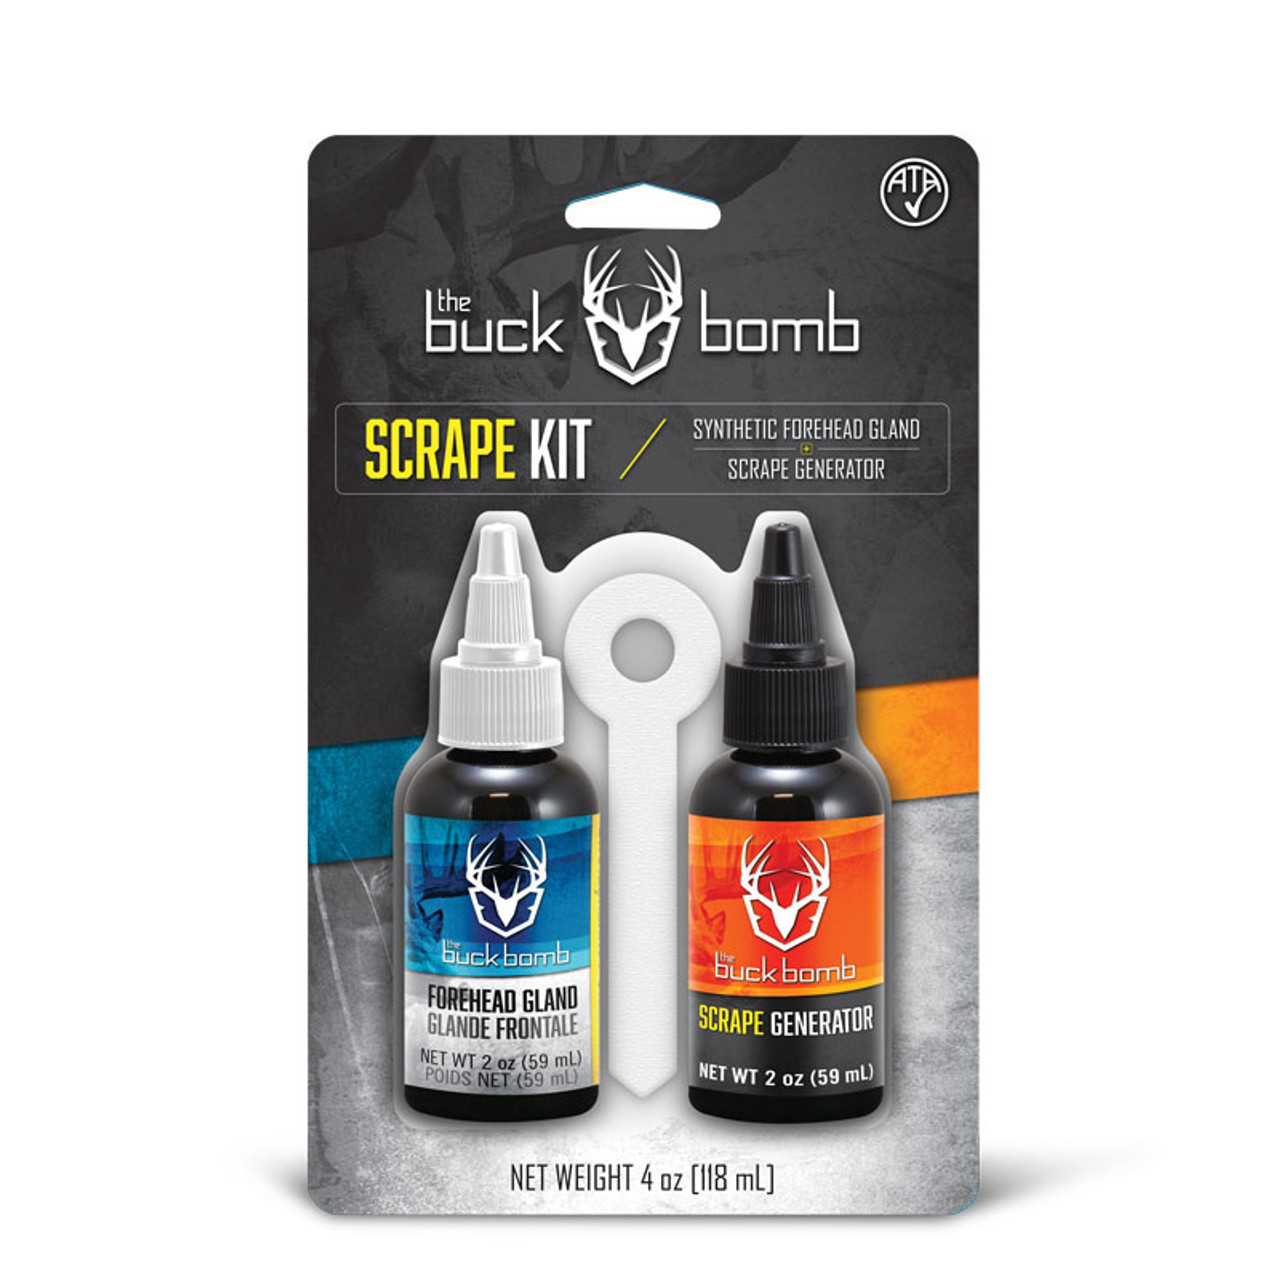 The Buck Bomb Scrape Kit includes both the 2oz Scrape Generator scent as well as the 2oz Synthetic Forehead Gland, a deadly combination for attracting bucks throughout the rut. Forehead Gland imitates the scent that comes from the forehead of a buck when he makes a rub, while Scrape Generator utilizes both Doe ‘n Estrus and BucRut scent to create the situation of a hot doe and buck in the area.

This kit is perfect to use in mock scrapes to cause bucks to come claim their territory. Also includes 4 spike wicks to use with the scents.

Features:

2oz Scrape Generator imitates a hot doe and buck
2oz Forehead Gland imitates the scent that comes from the forehead of a rubbing buck
Includes 4 spike wicks for use with liquid scent
Use in mock scrapes or on limbs near your treestand to cause bucks to come claim their territory